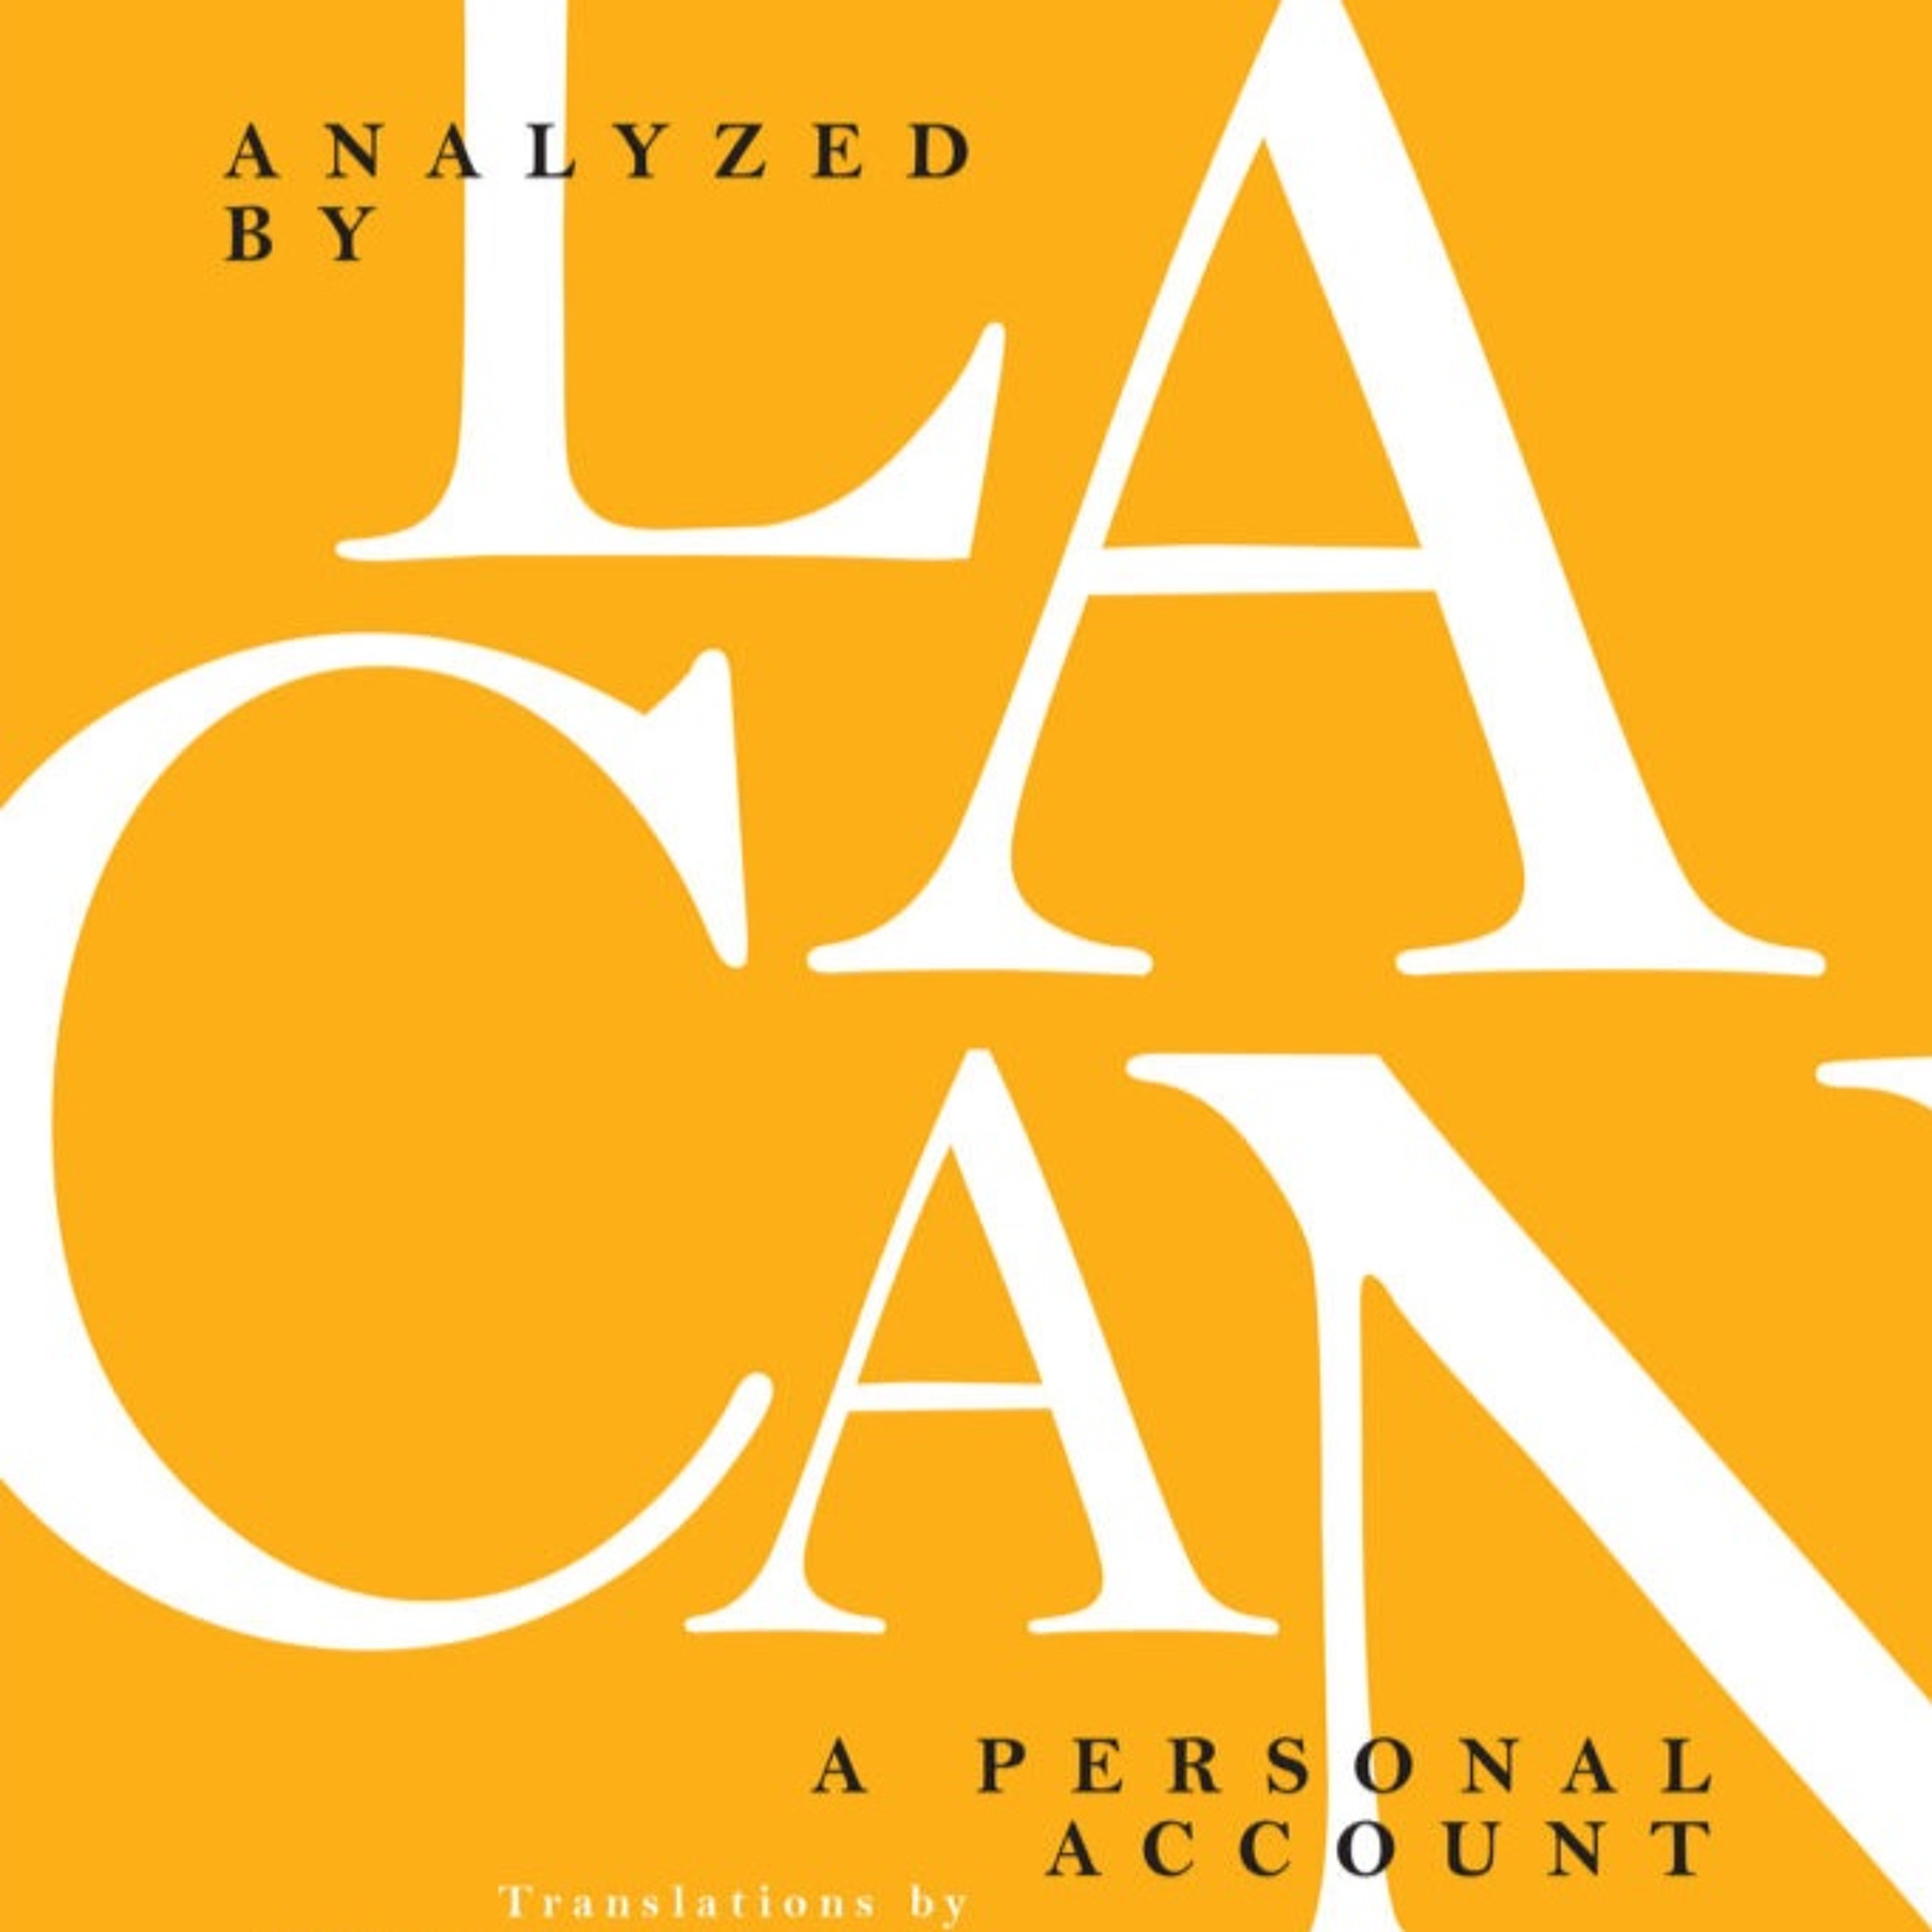 RU290: DRS BETTY MILAN & CHRIS VANDERWEES ON ANALYZED BY LACAN: A PERSONAL ACCOUNT